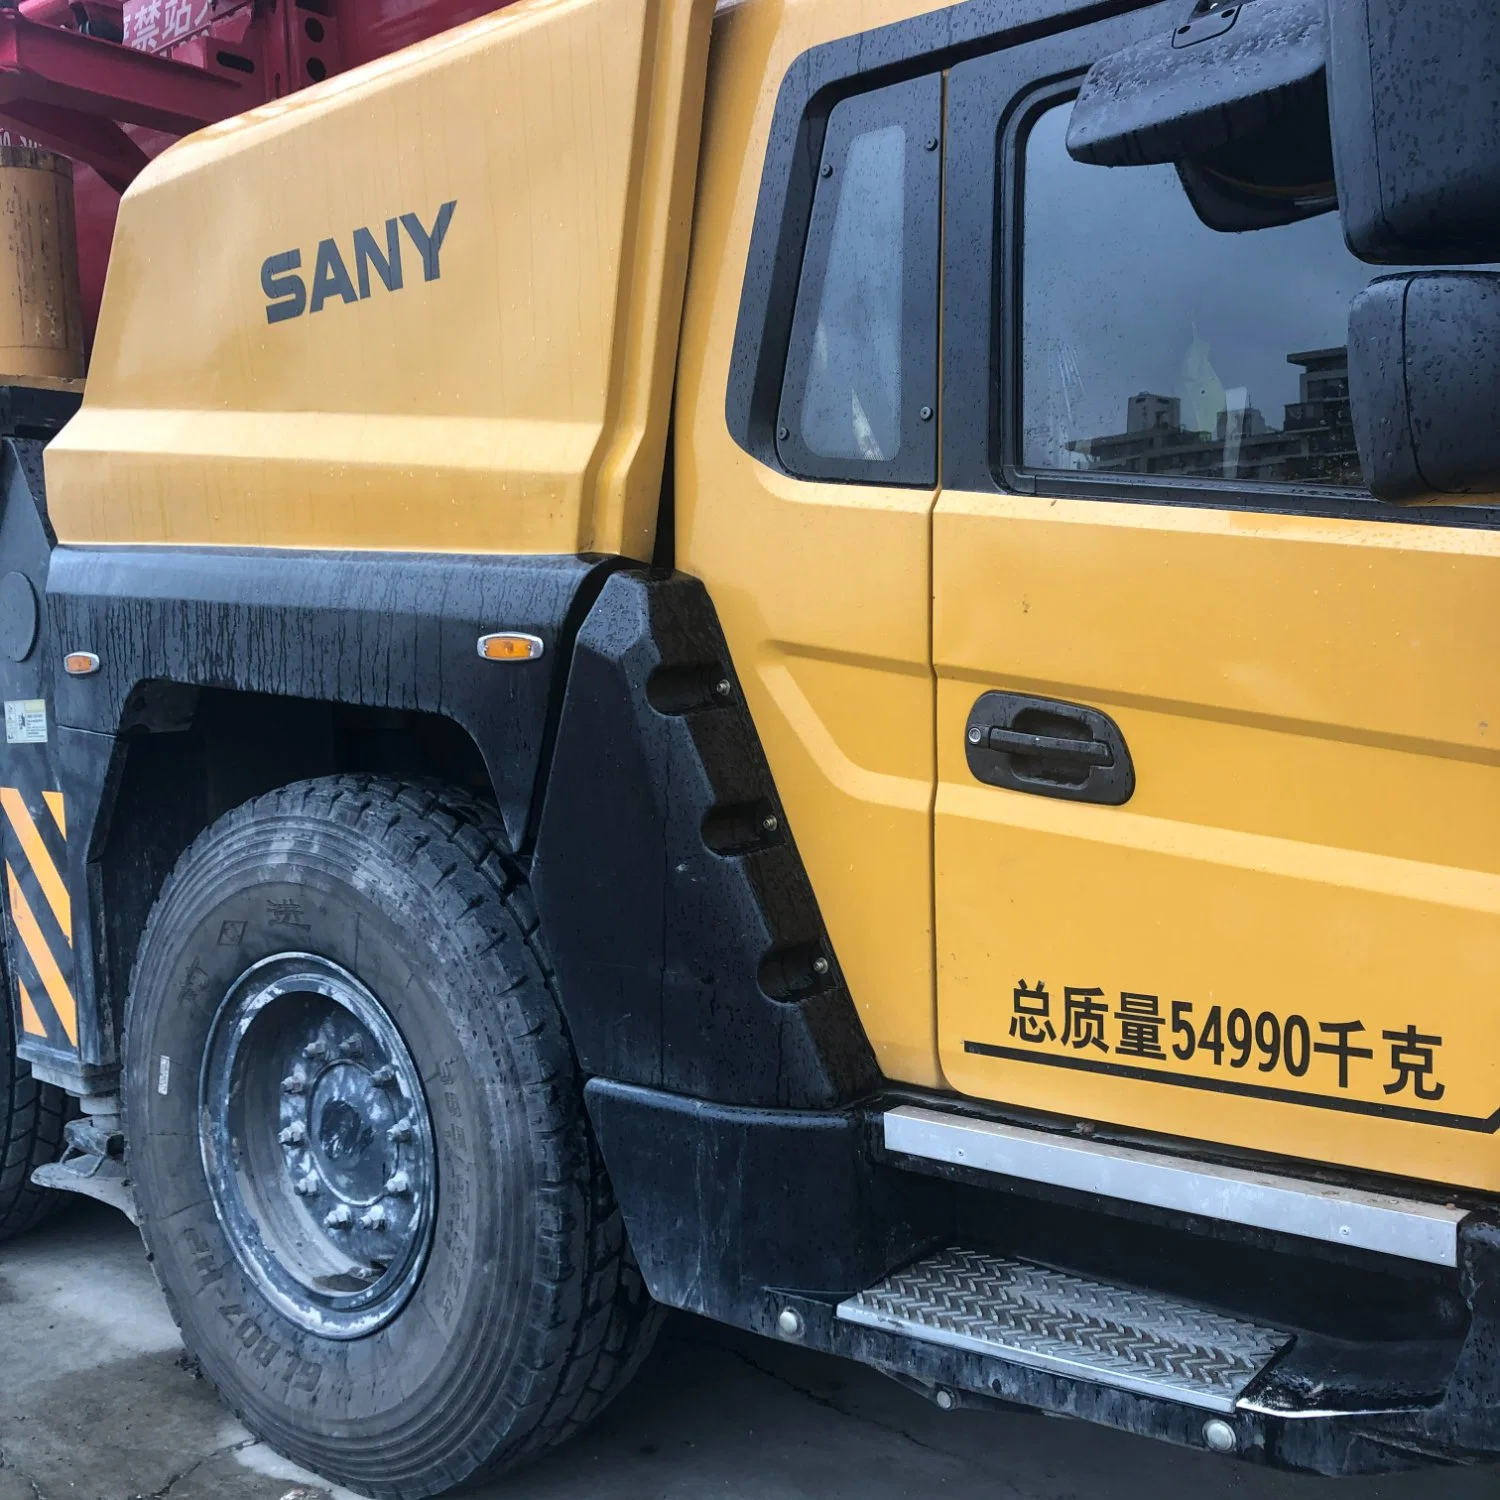 Sale Good Condition Used Construction Machine Sany Stc55 for Cheap Sale Excavator with High Efficiency Truck Crane